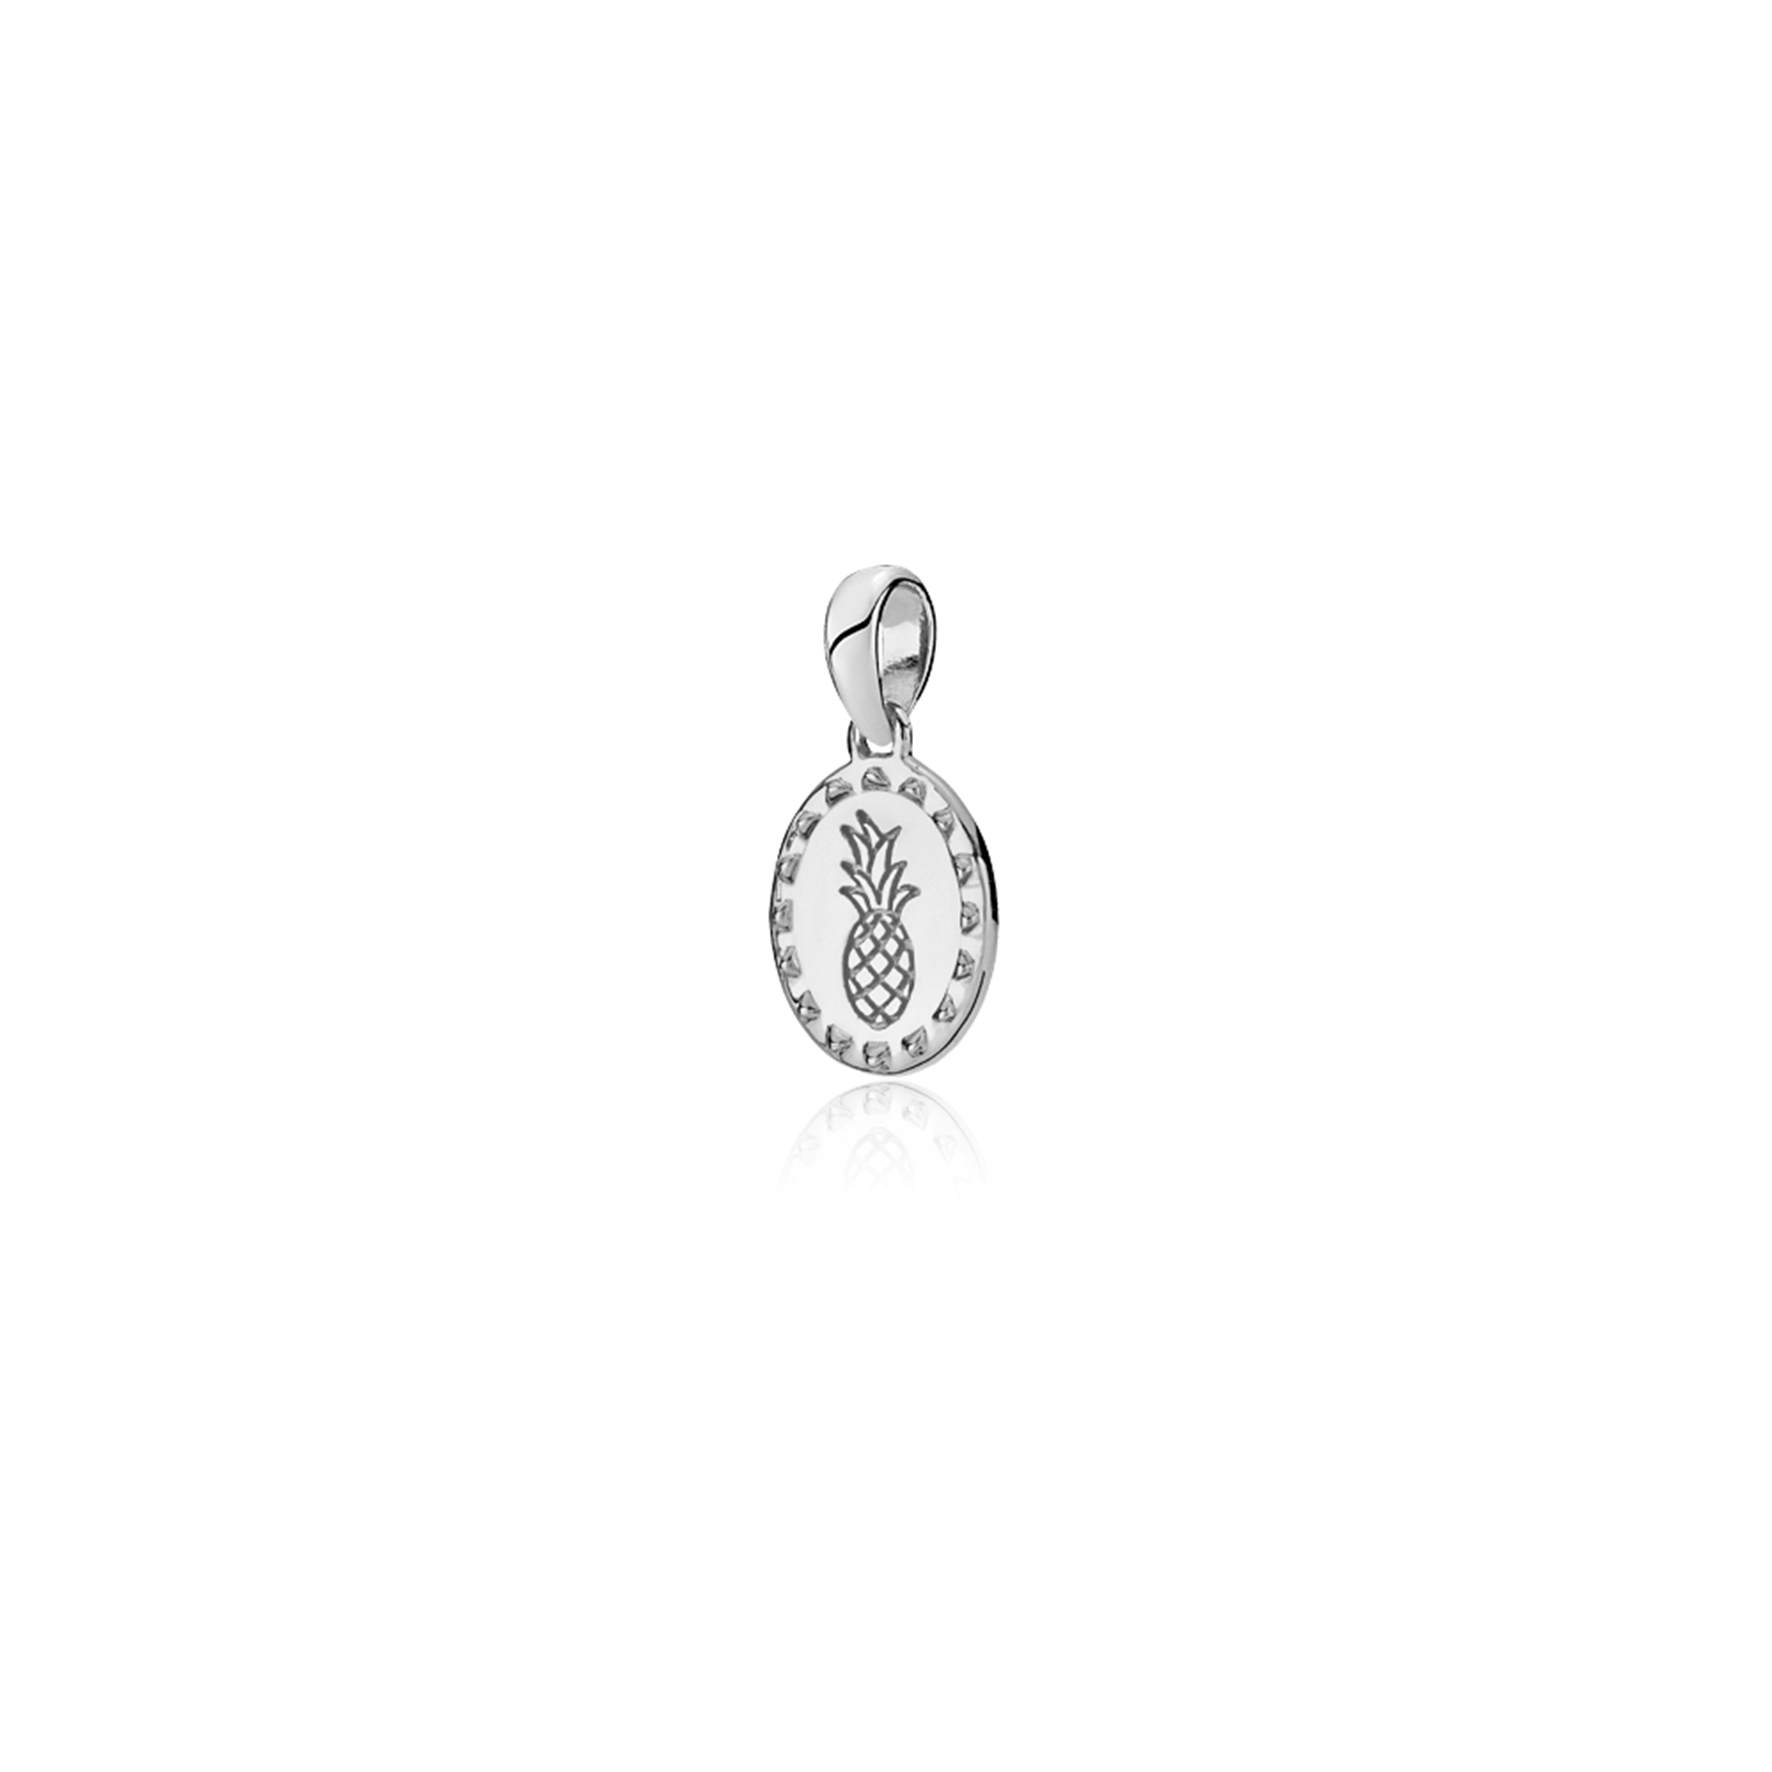 Anna By Sistie Round Pendant from Sistie in Silver Sterling 925